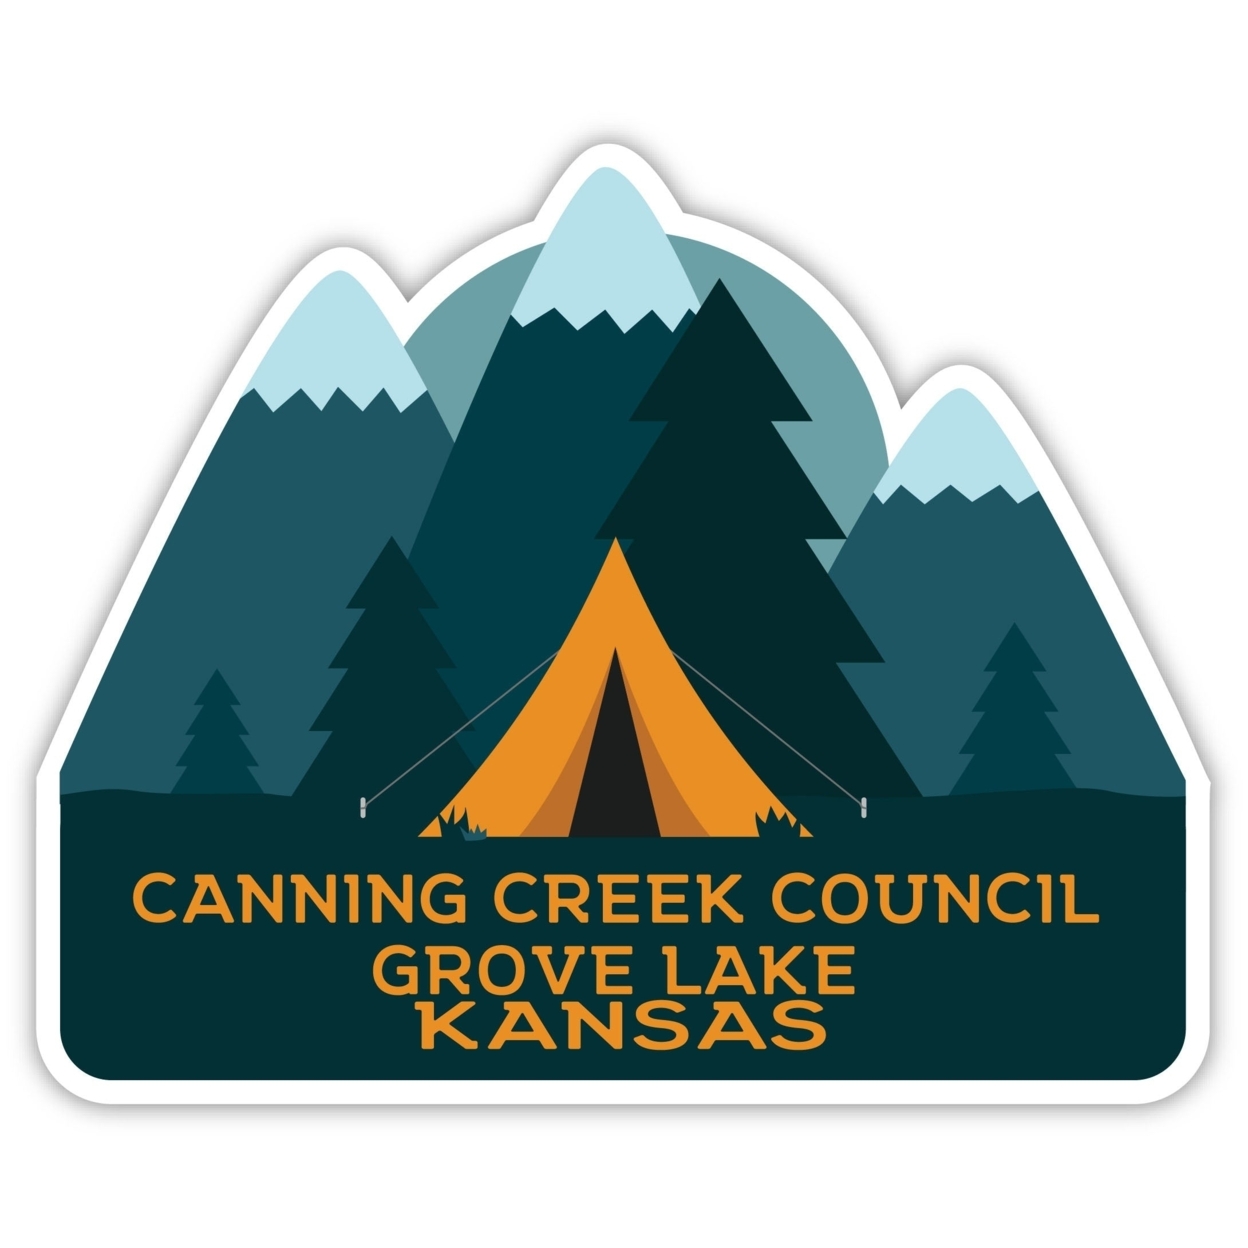 Canning Creek Council Grove Lake Kansas Souvenir Decorative Stickers (Choose Theme And Size) - 4-Pack, 6-Inch, Tent